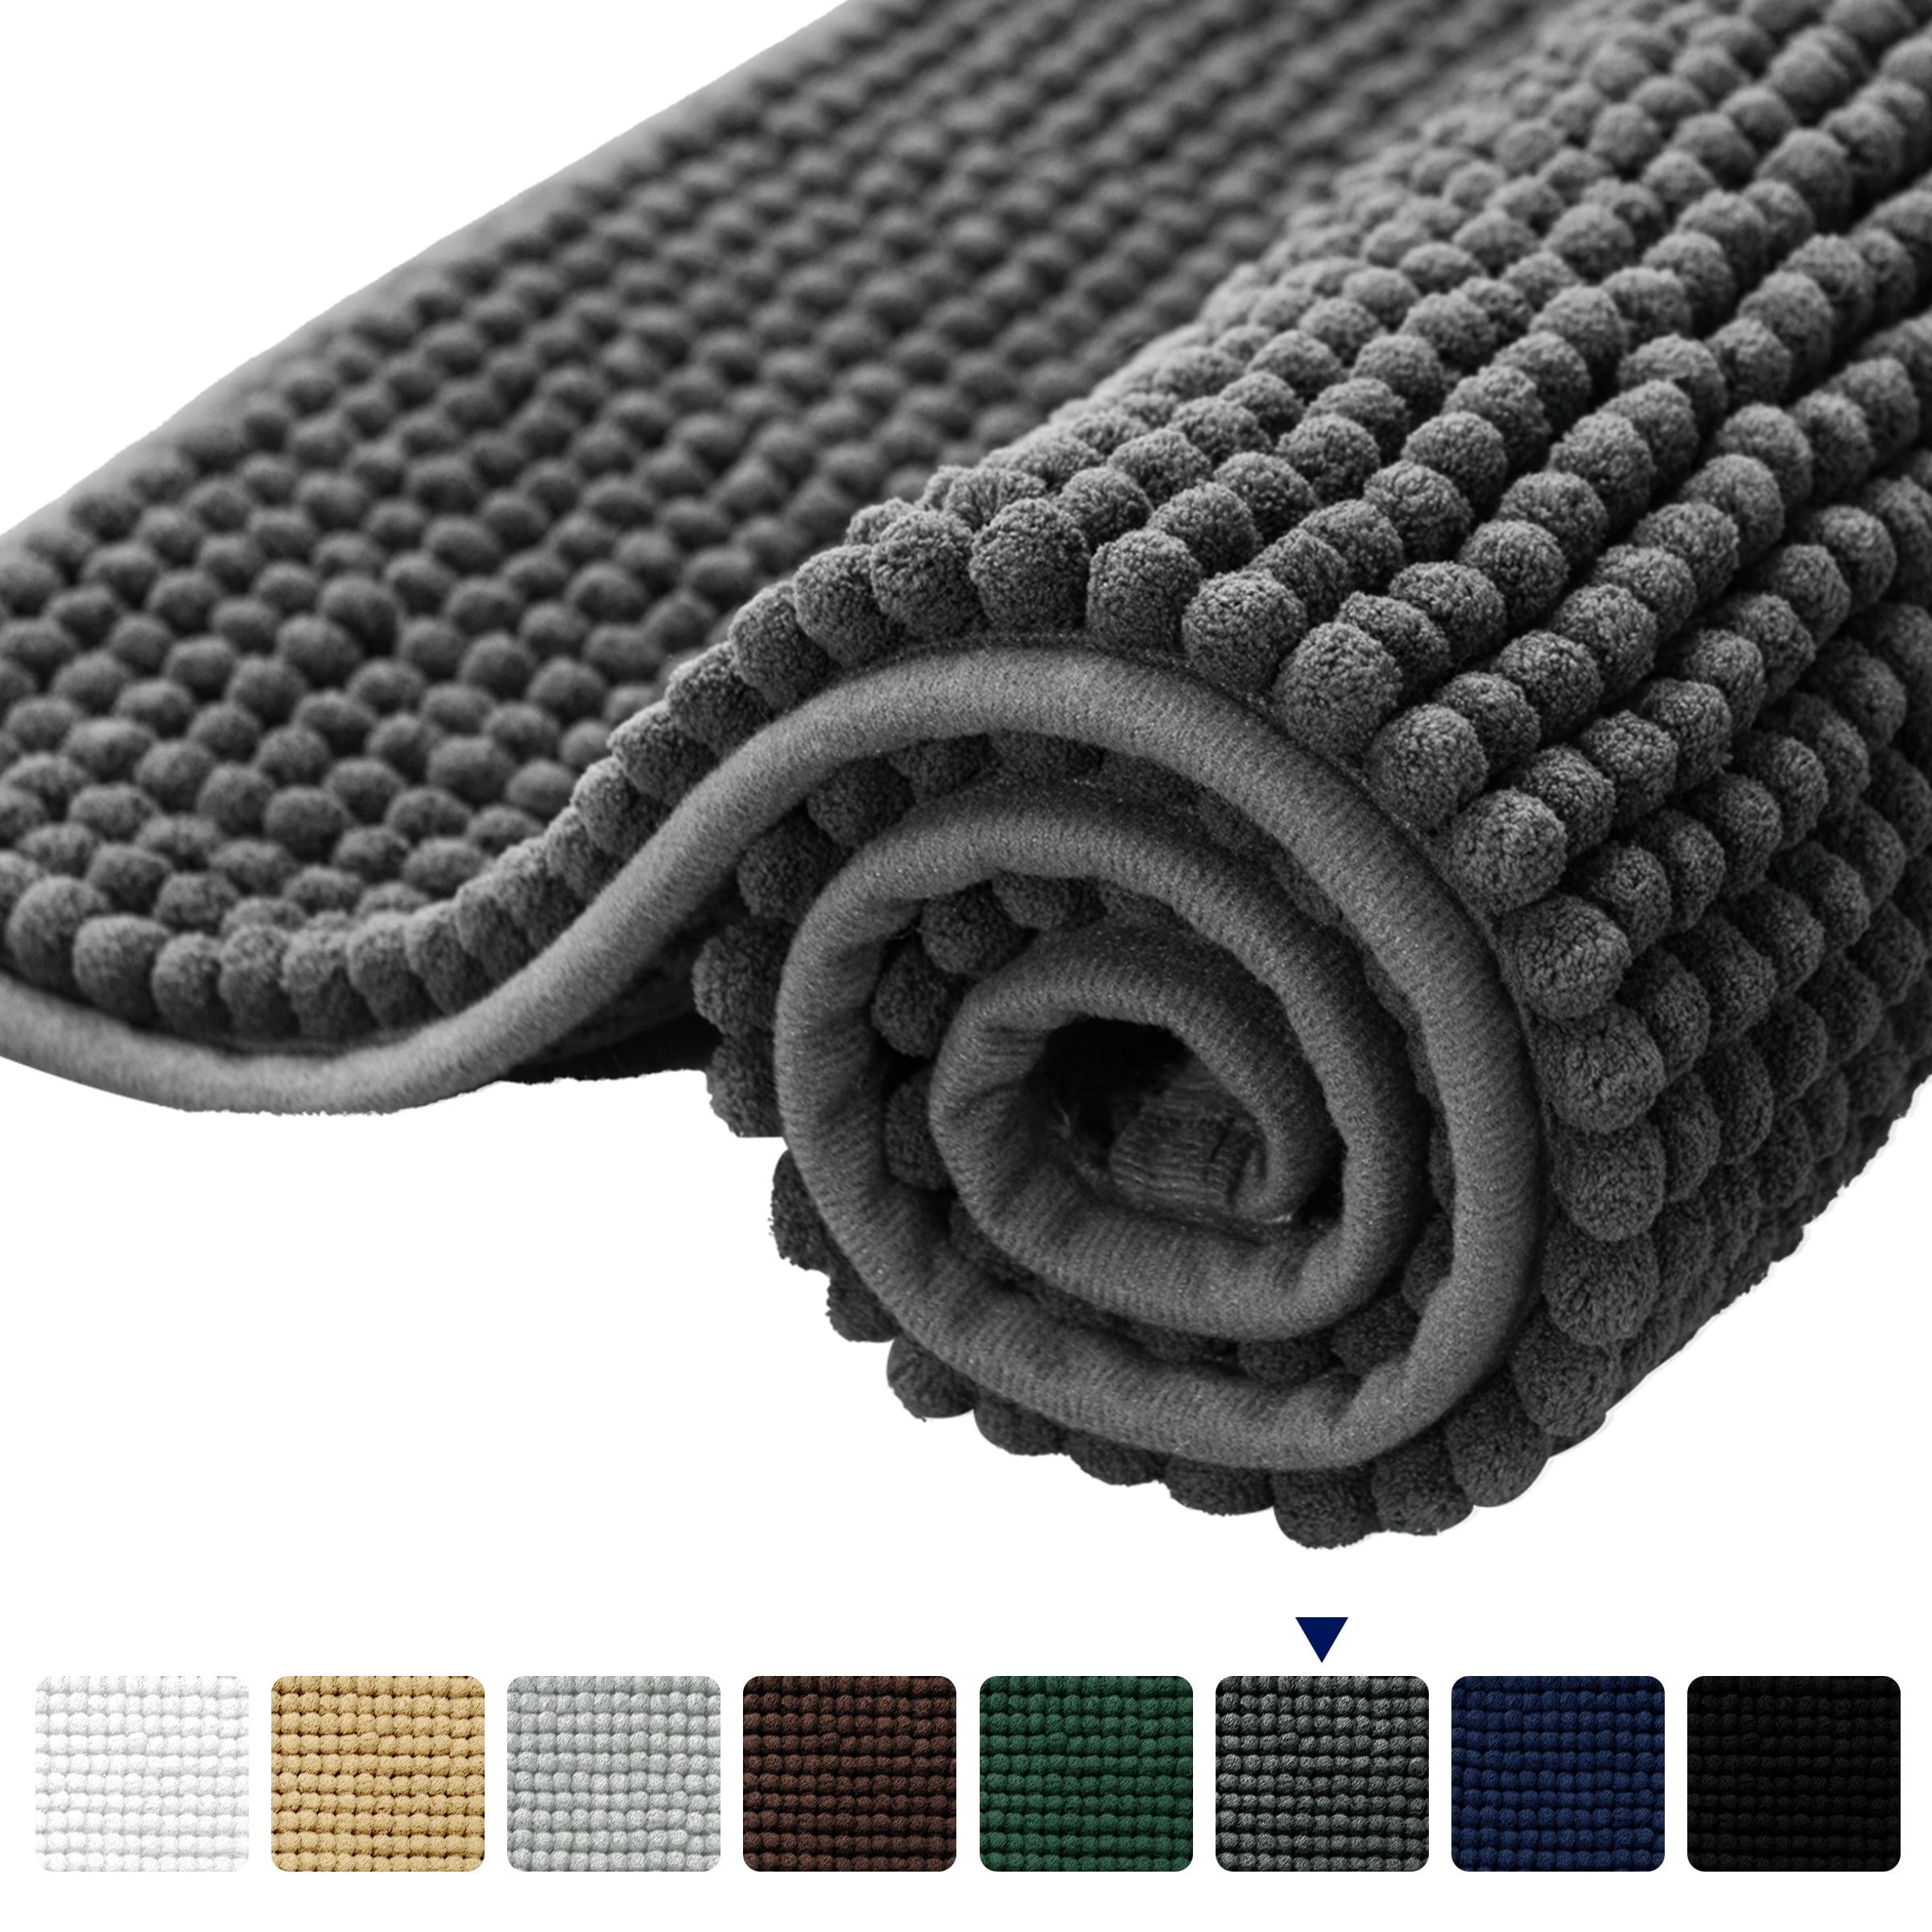 DweIke Chenille Bathroom Mats with Non-Slip Backing Machine Washable Indoor Durable Rug 24 inchx36 inch,Gray, Size: 24 x 36